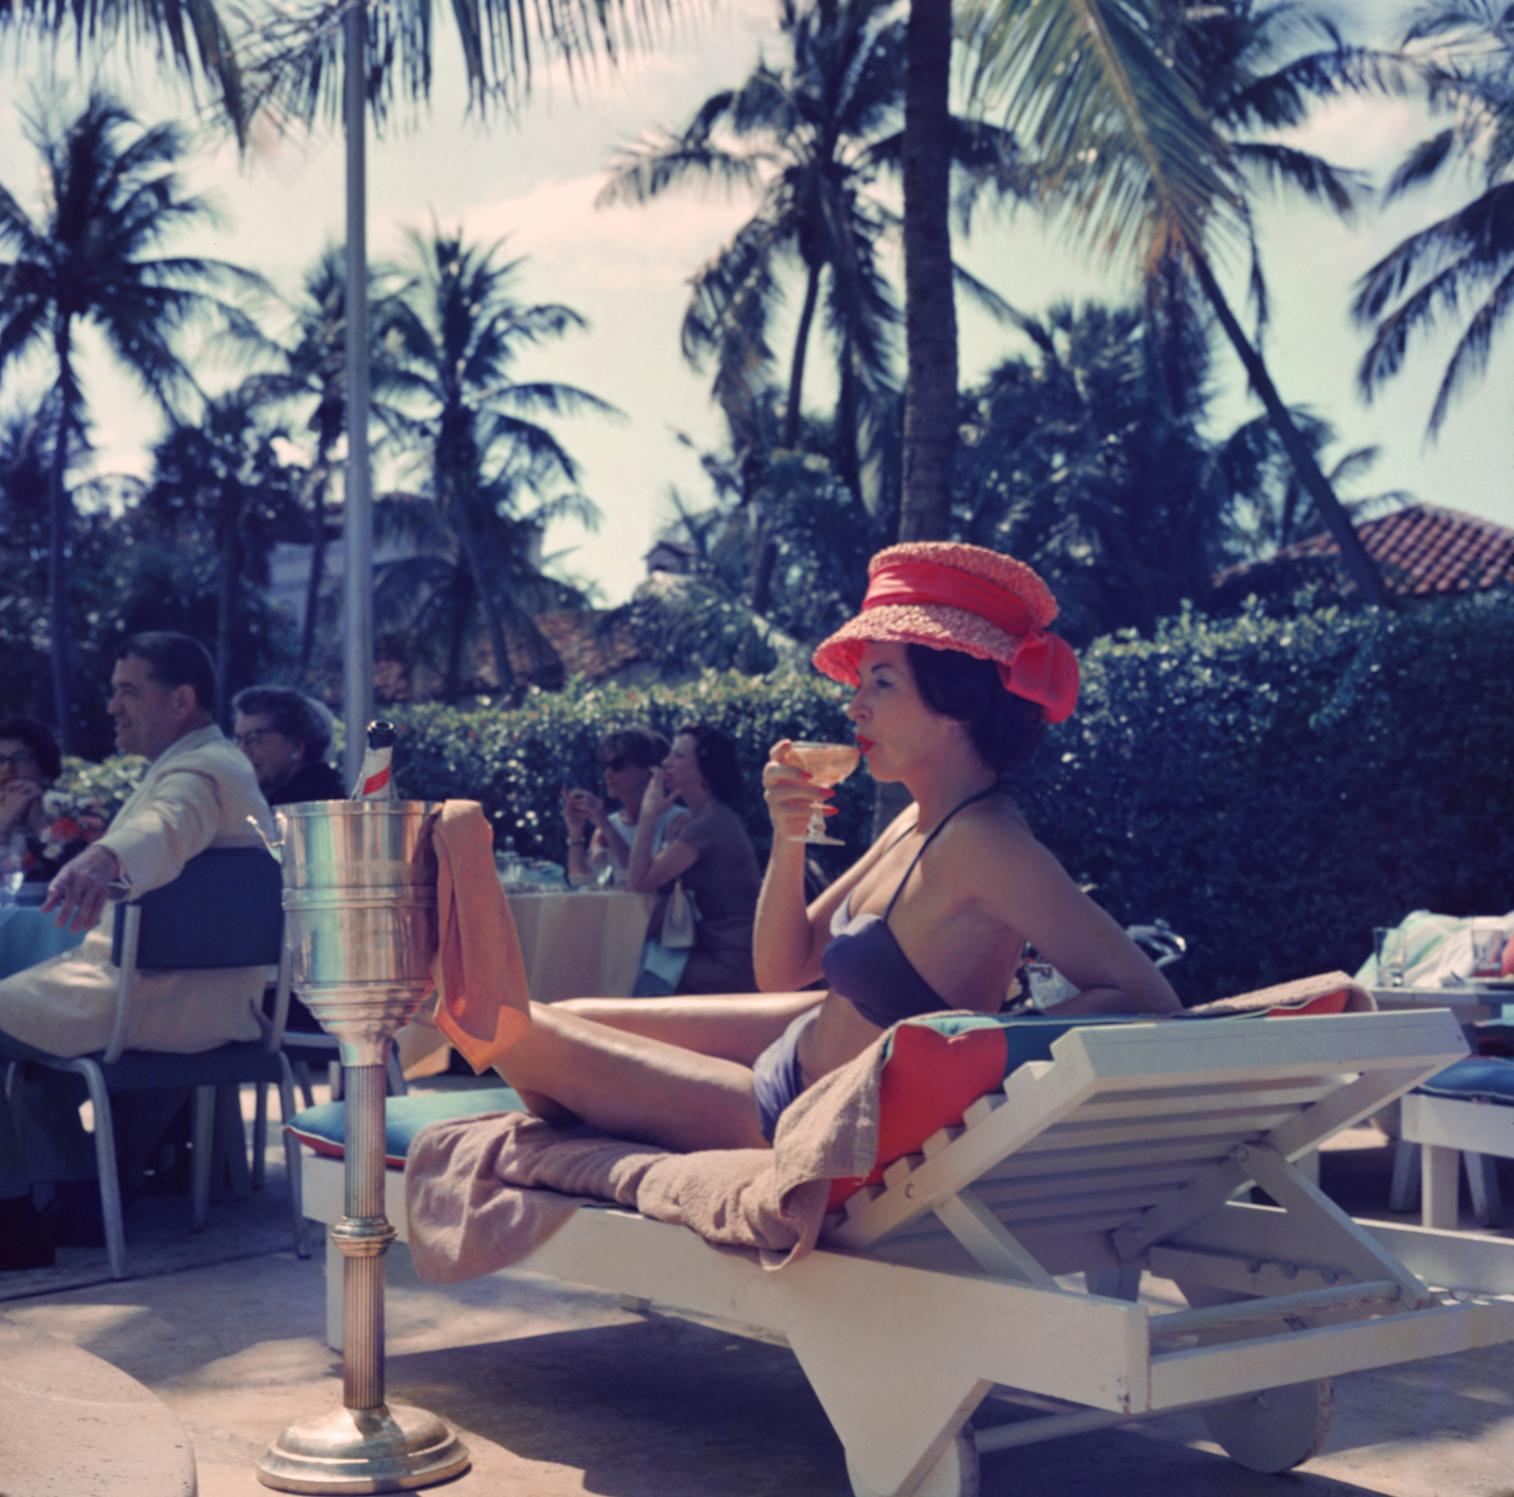 Slim Aarons Portrait Photograph - Leisure and Fashion, Colony Hotel, Palm Beach, Estate Edition